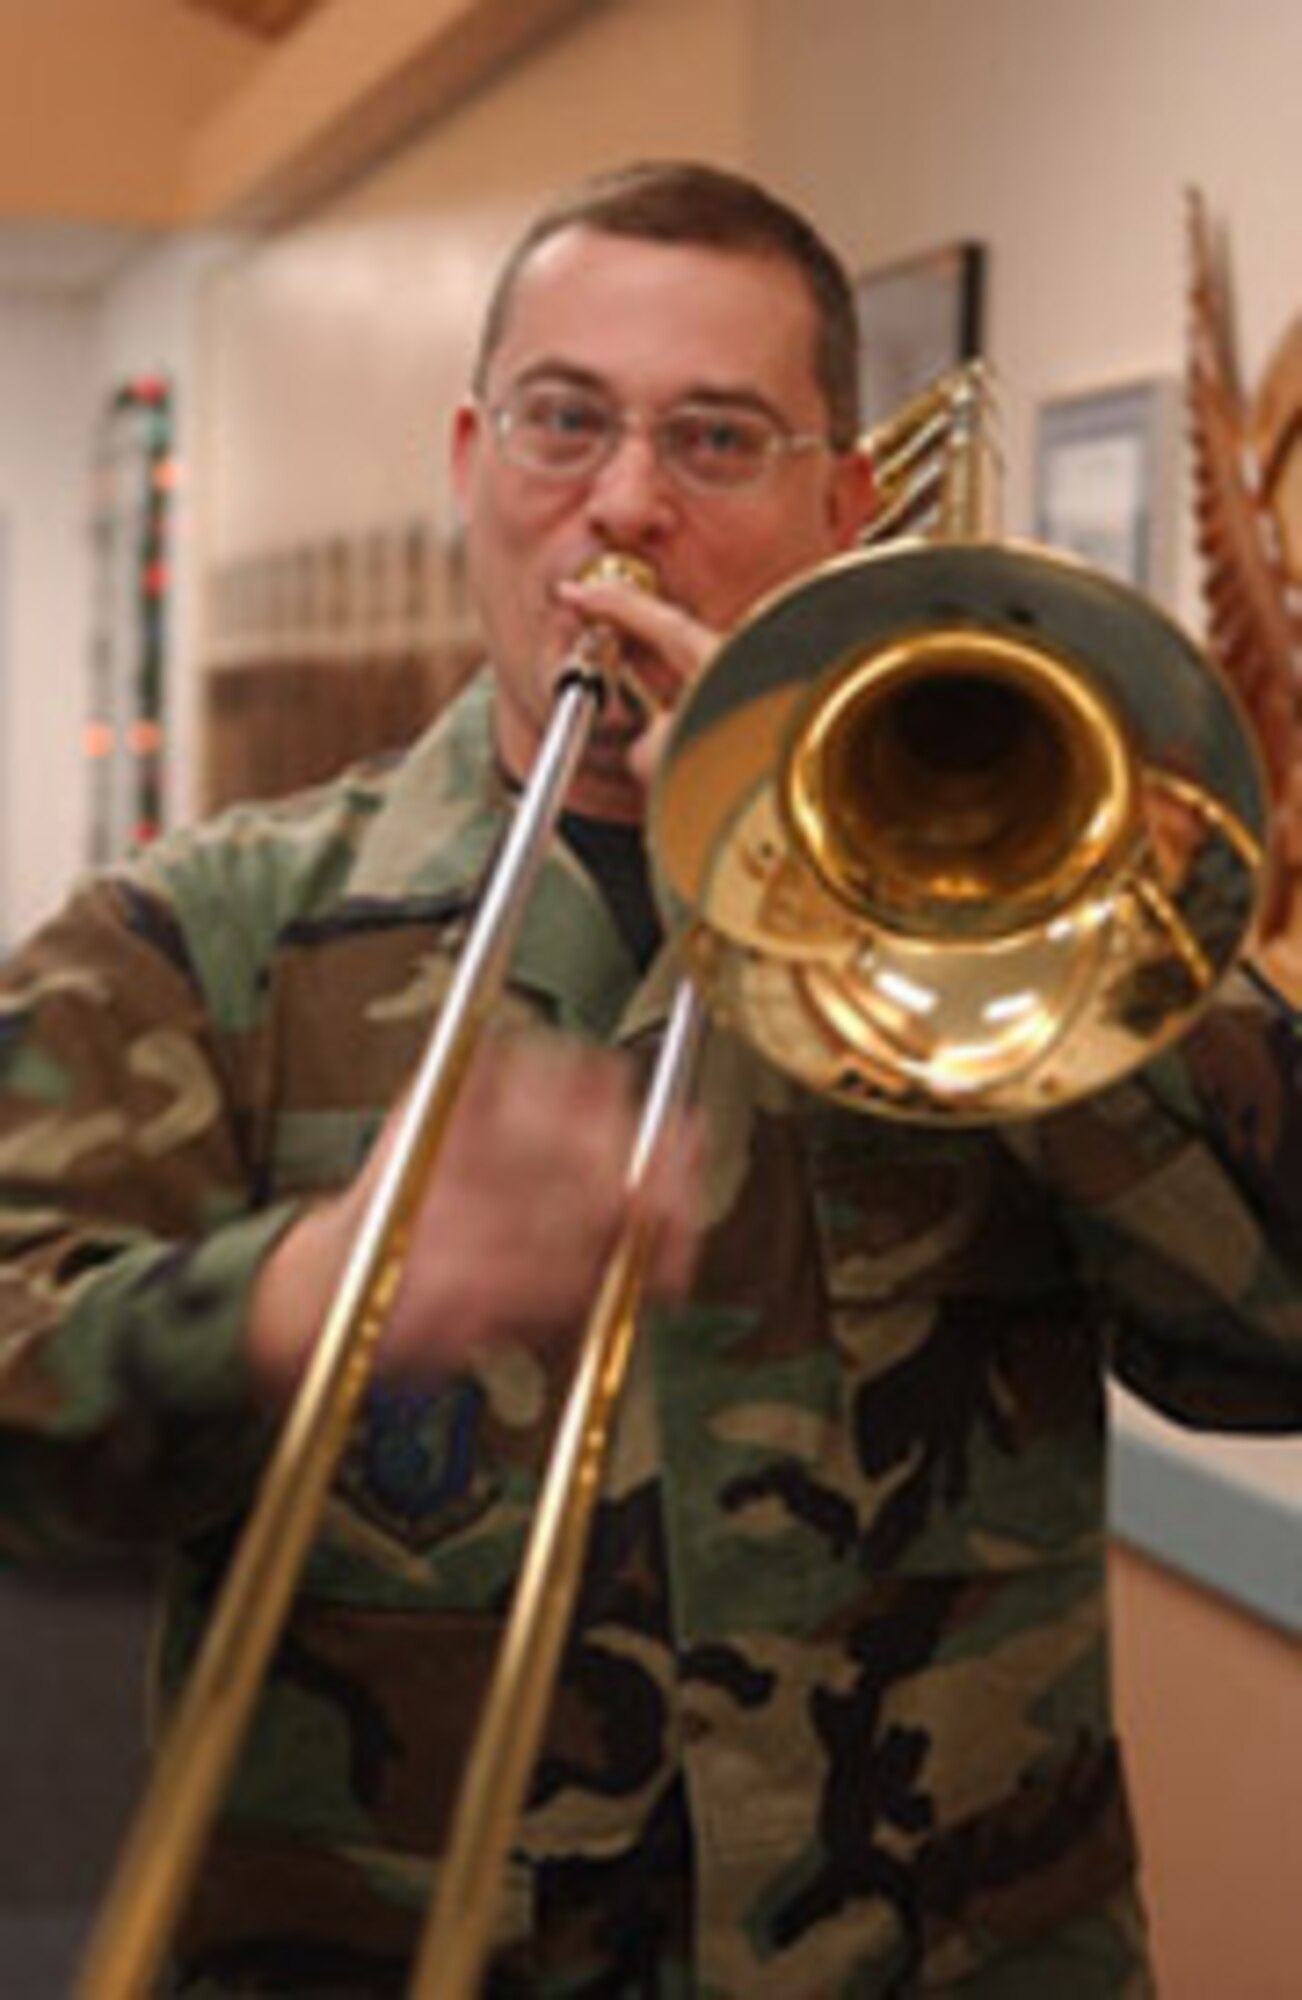 EIELSON AIR FORCE BASE, Alaska--Staff Sgt. William Harris, PACAF Alaska Brass Quintet trombone player, plays Christmas music Dec. 6 at the 355th Fighter Squadron. (U.S. Air Force photo by Senior Airman Anthony Nelson Jr.)
 
